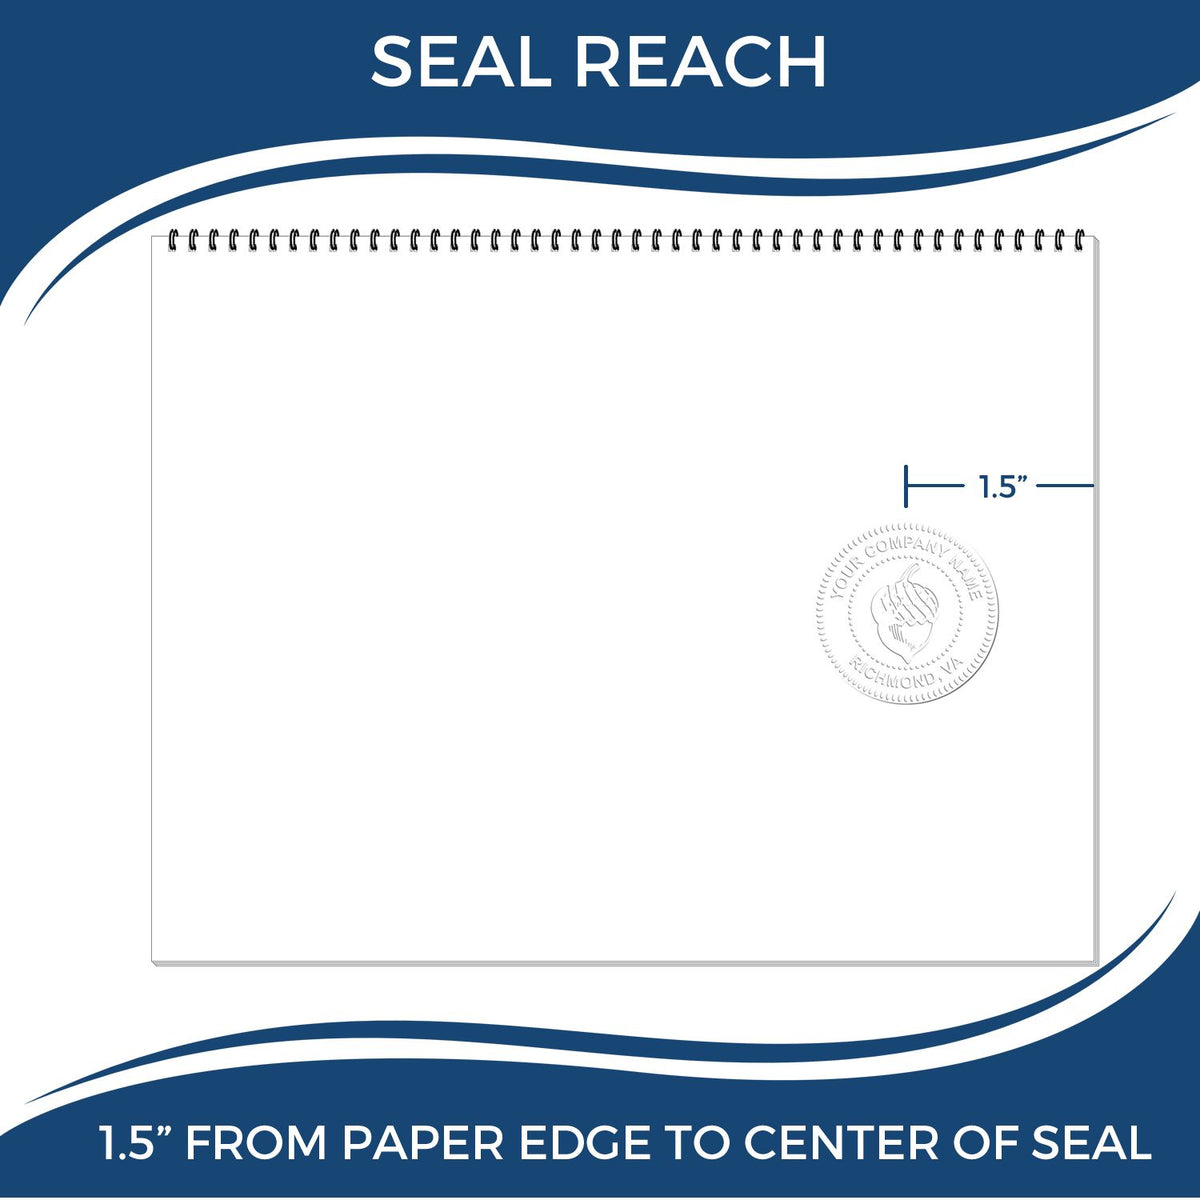 An infographic showing the seal reach which is represented by a ruler and a miniature seal image of the Handheld Oklahoma Professional Engineer Embosser